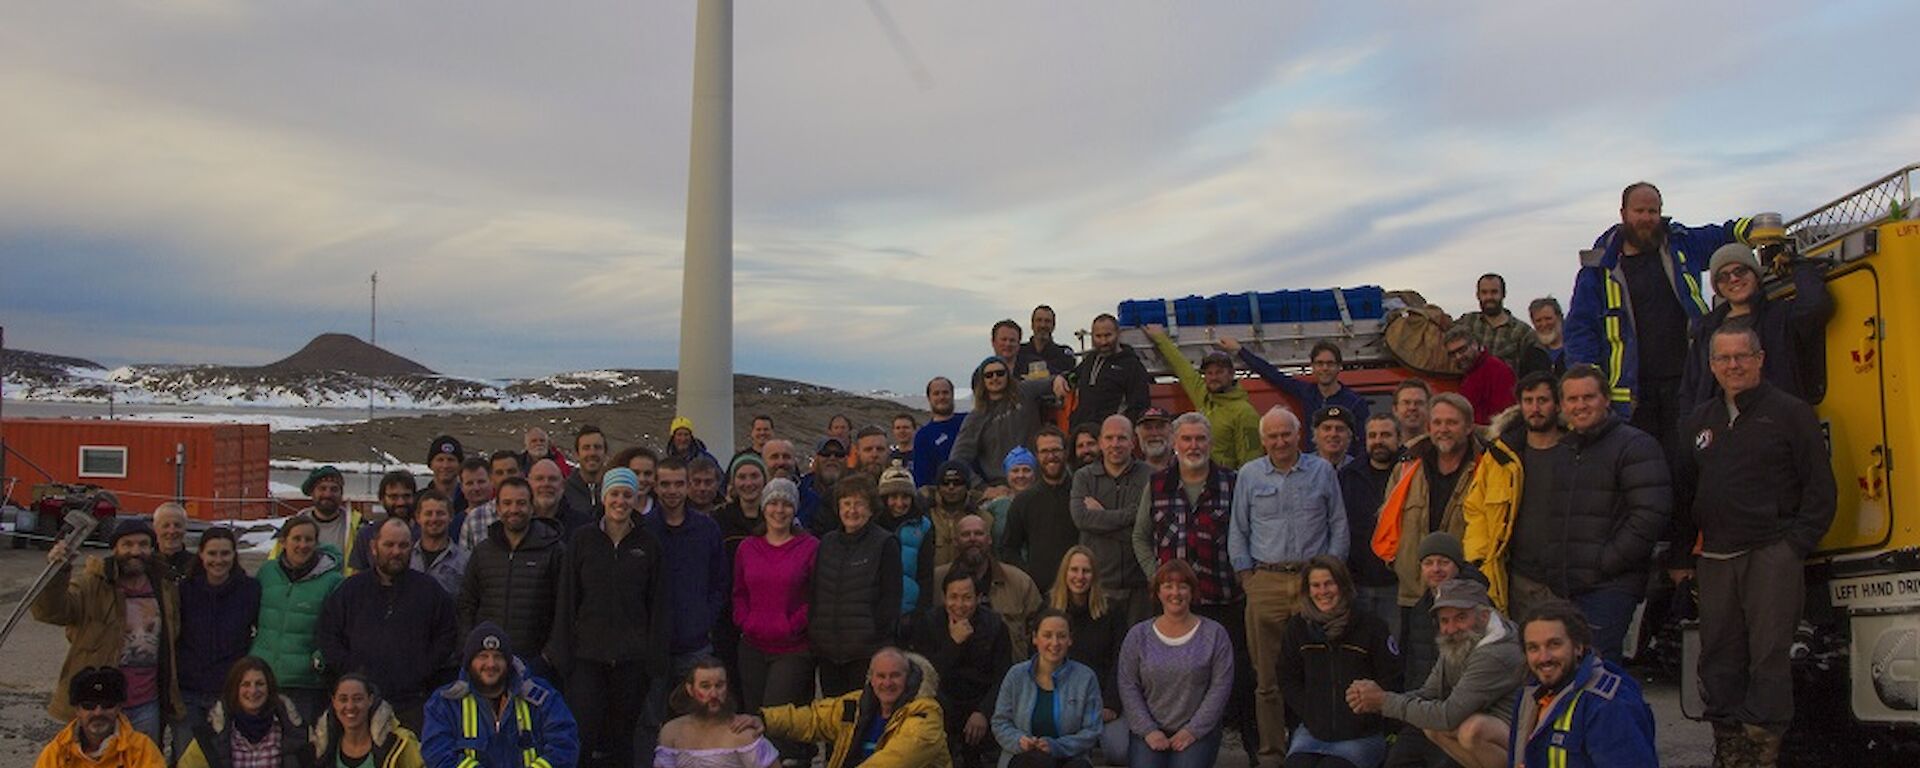 A group of 75 people standing next to two Hägglunds